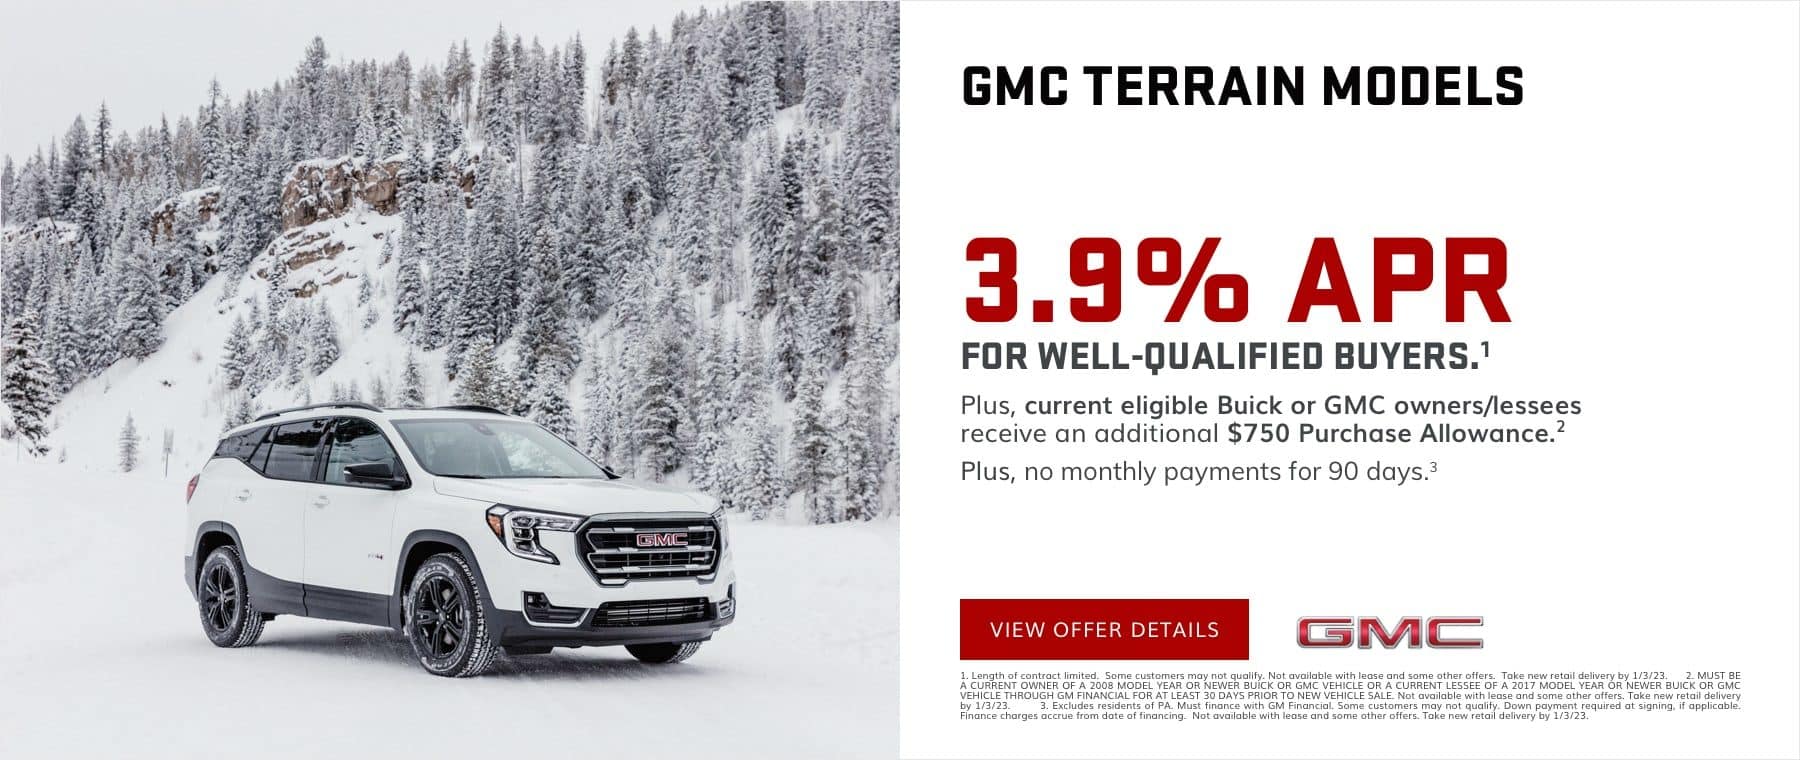 3.9% APR for 72 months for well-qualified buyers.1 Plus, current eligible Buick or GMC owners/lessees receive an additional $750 Purchase Allowance.2 PLUS, NO MONTHLY PAYMENTS UNTIL 2023. 3